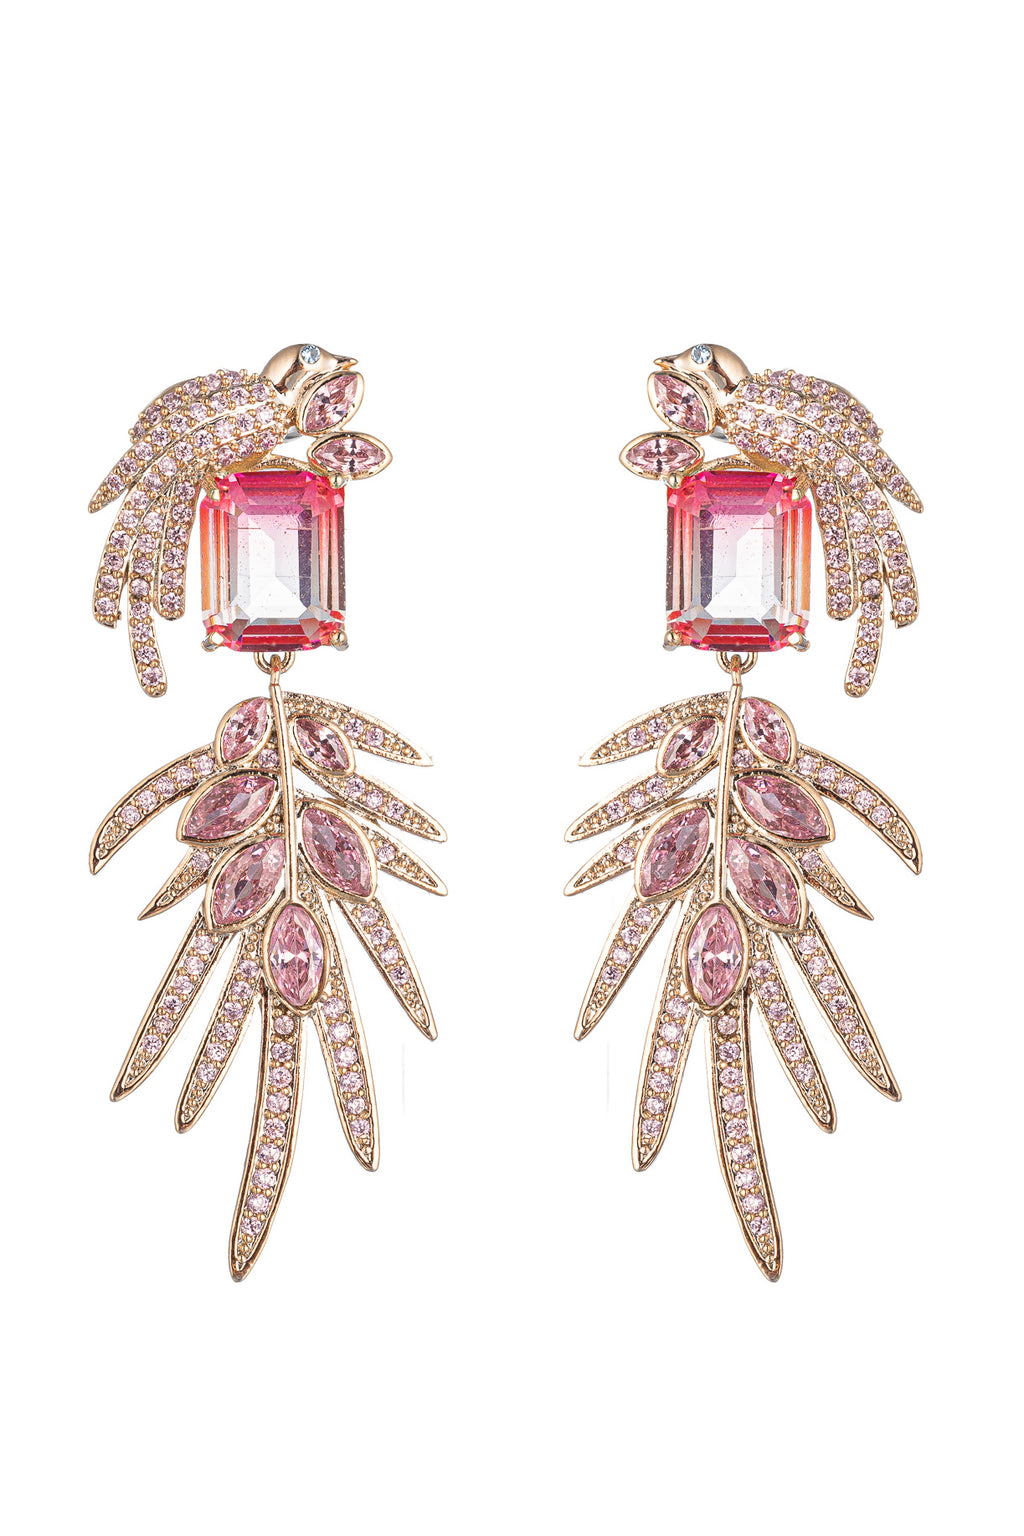 Gold tone brass flying bird statement earrings studded with CZ crystals.